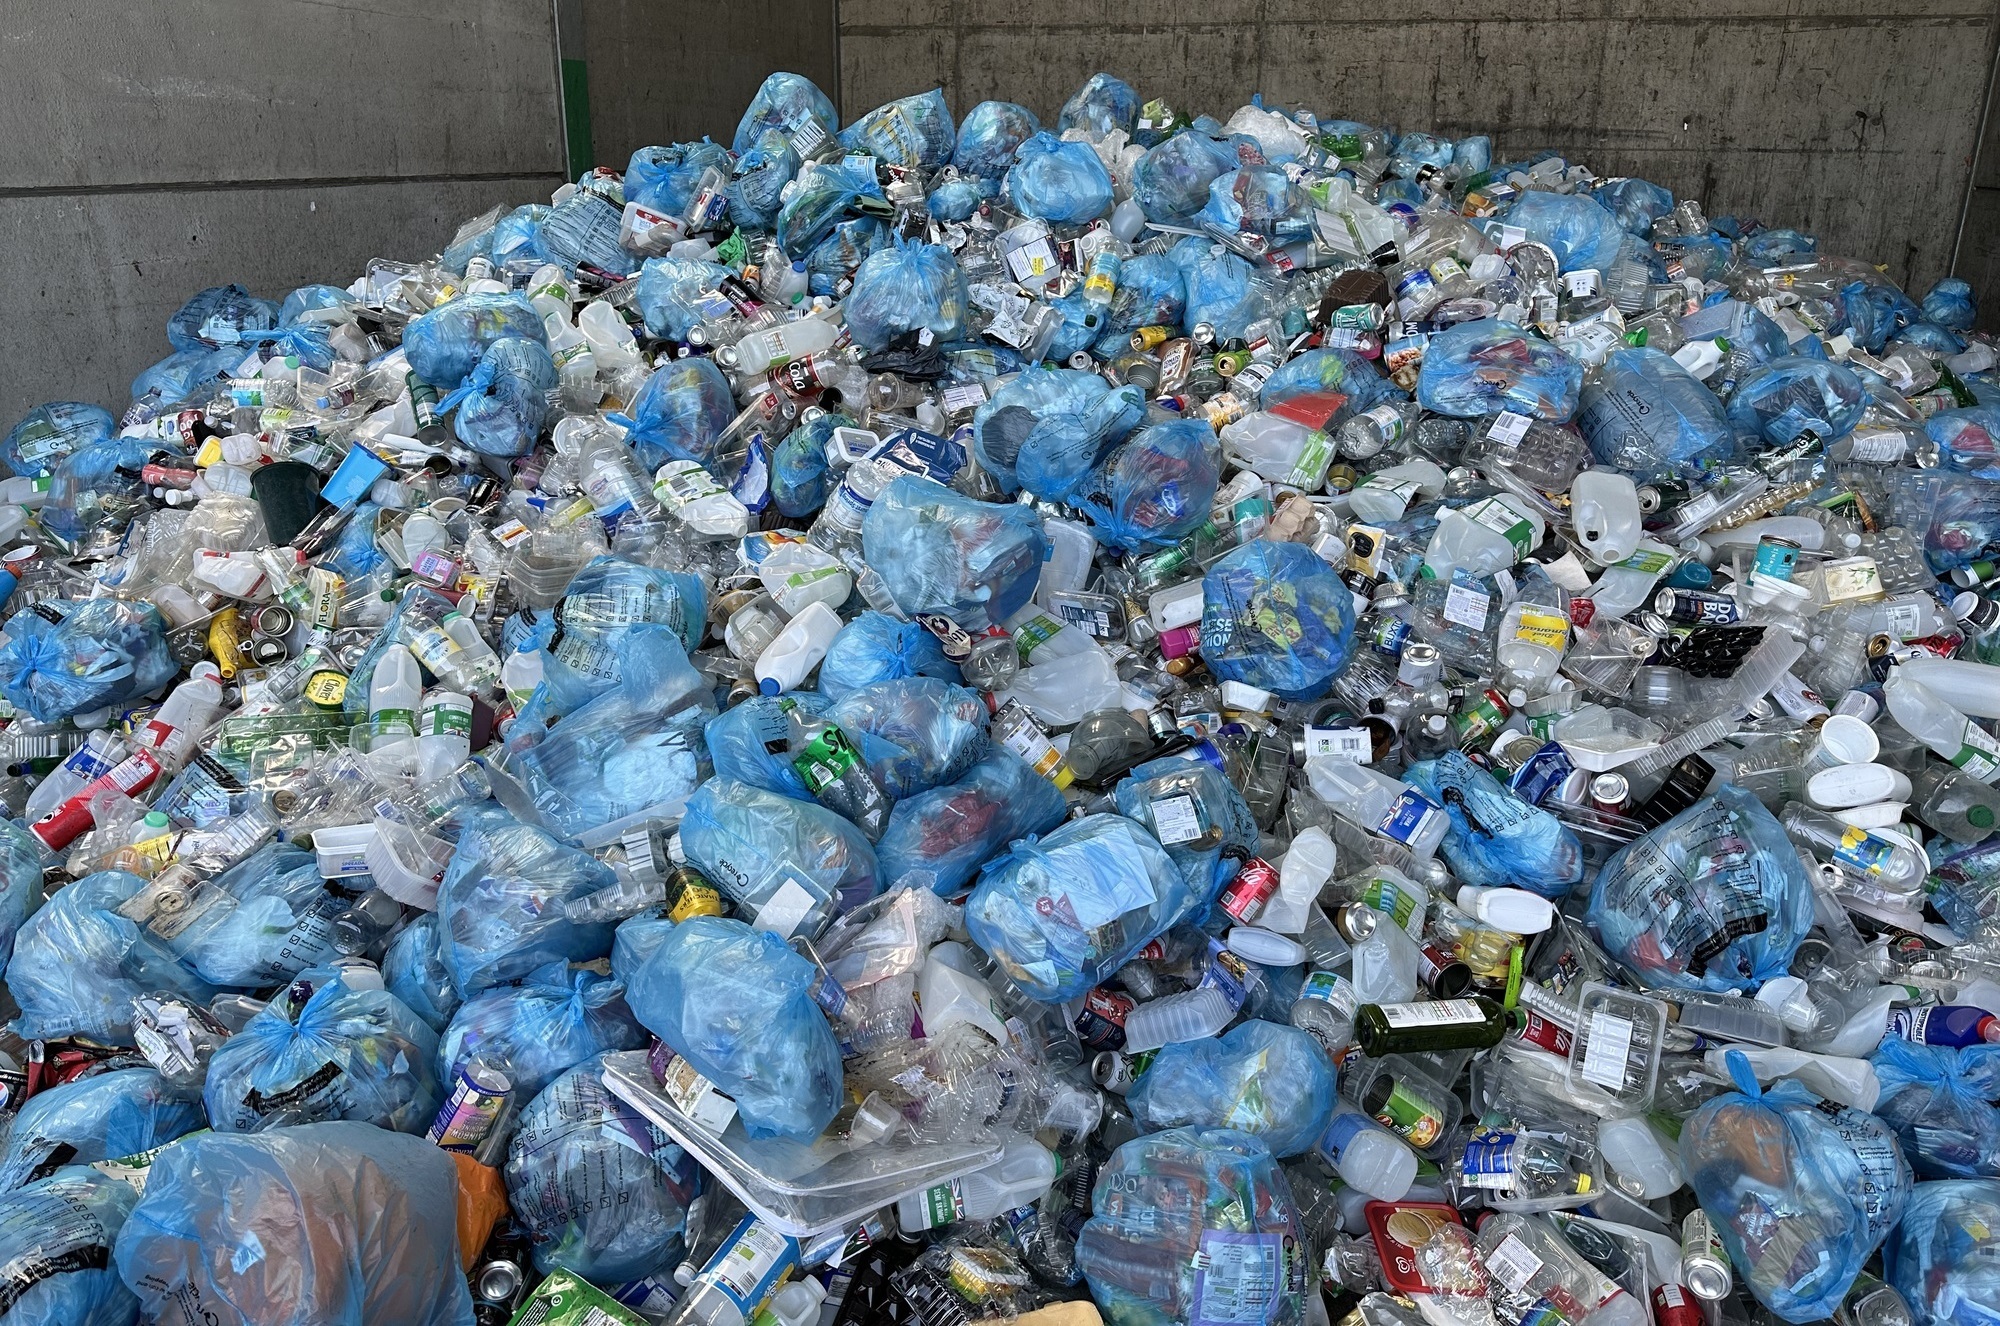 A large amount of plastic for recycling, which includes full blue bags used for collecting soft plastics